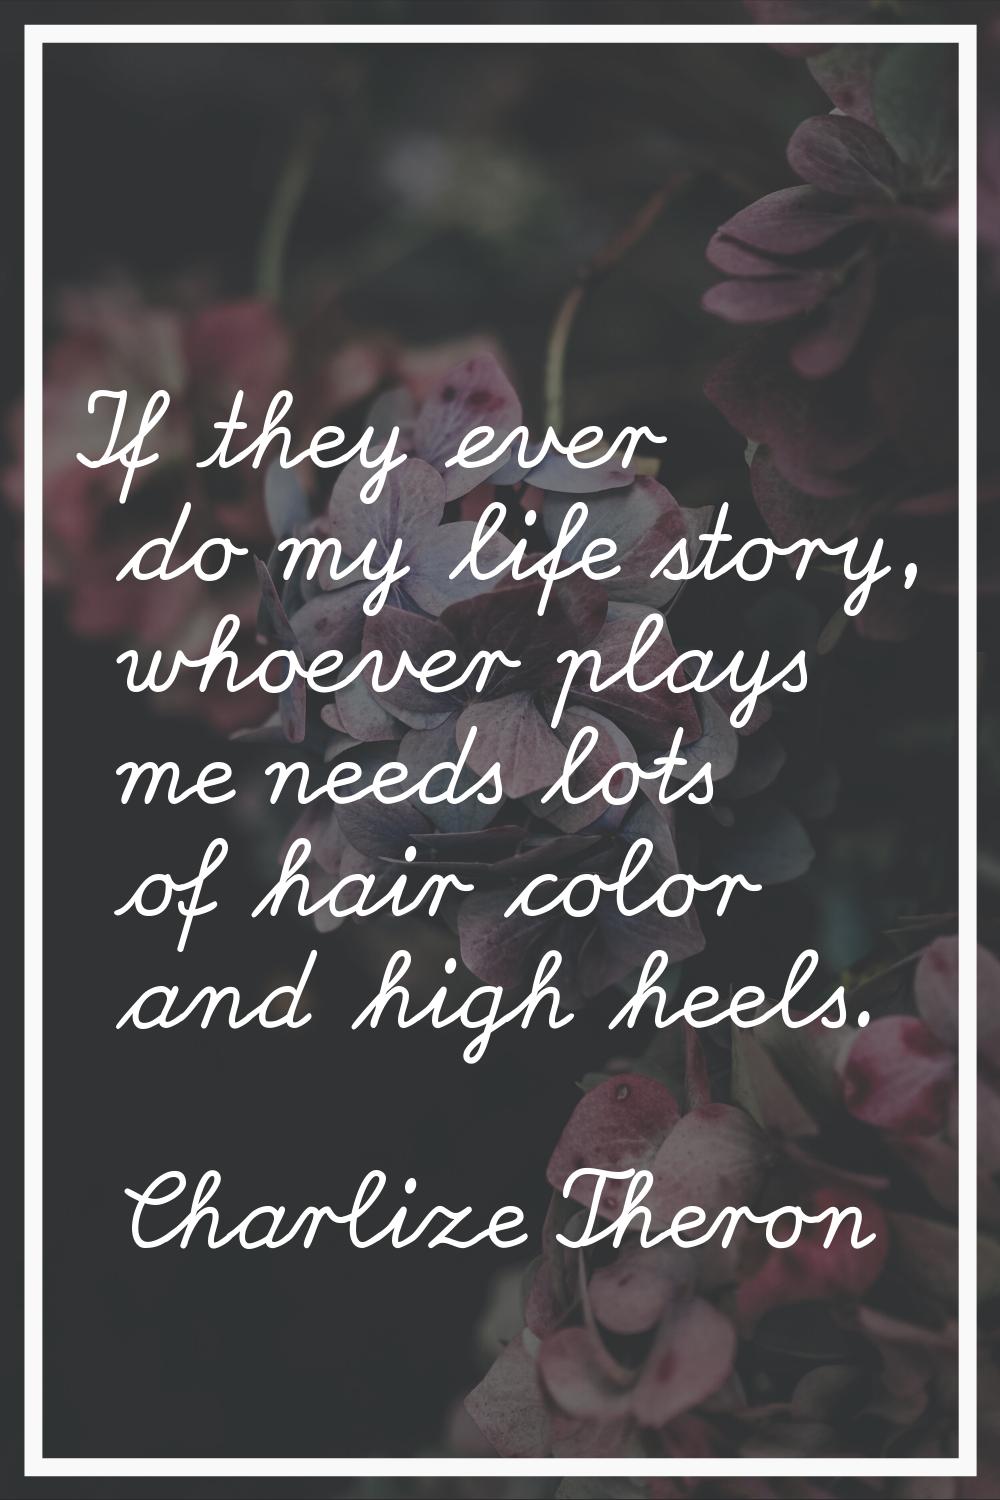 If they ever do my life story, whoever plays me needs lots of hair color and high heels.